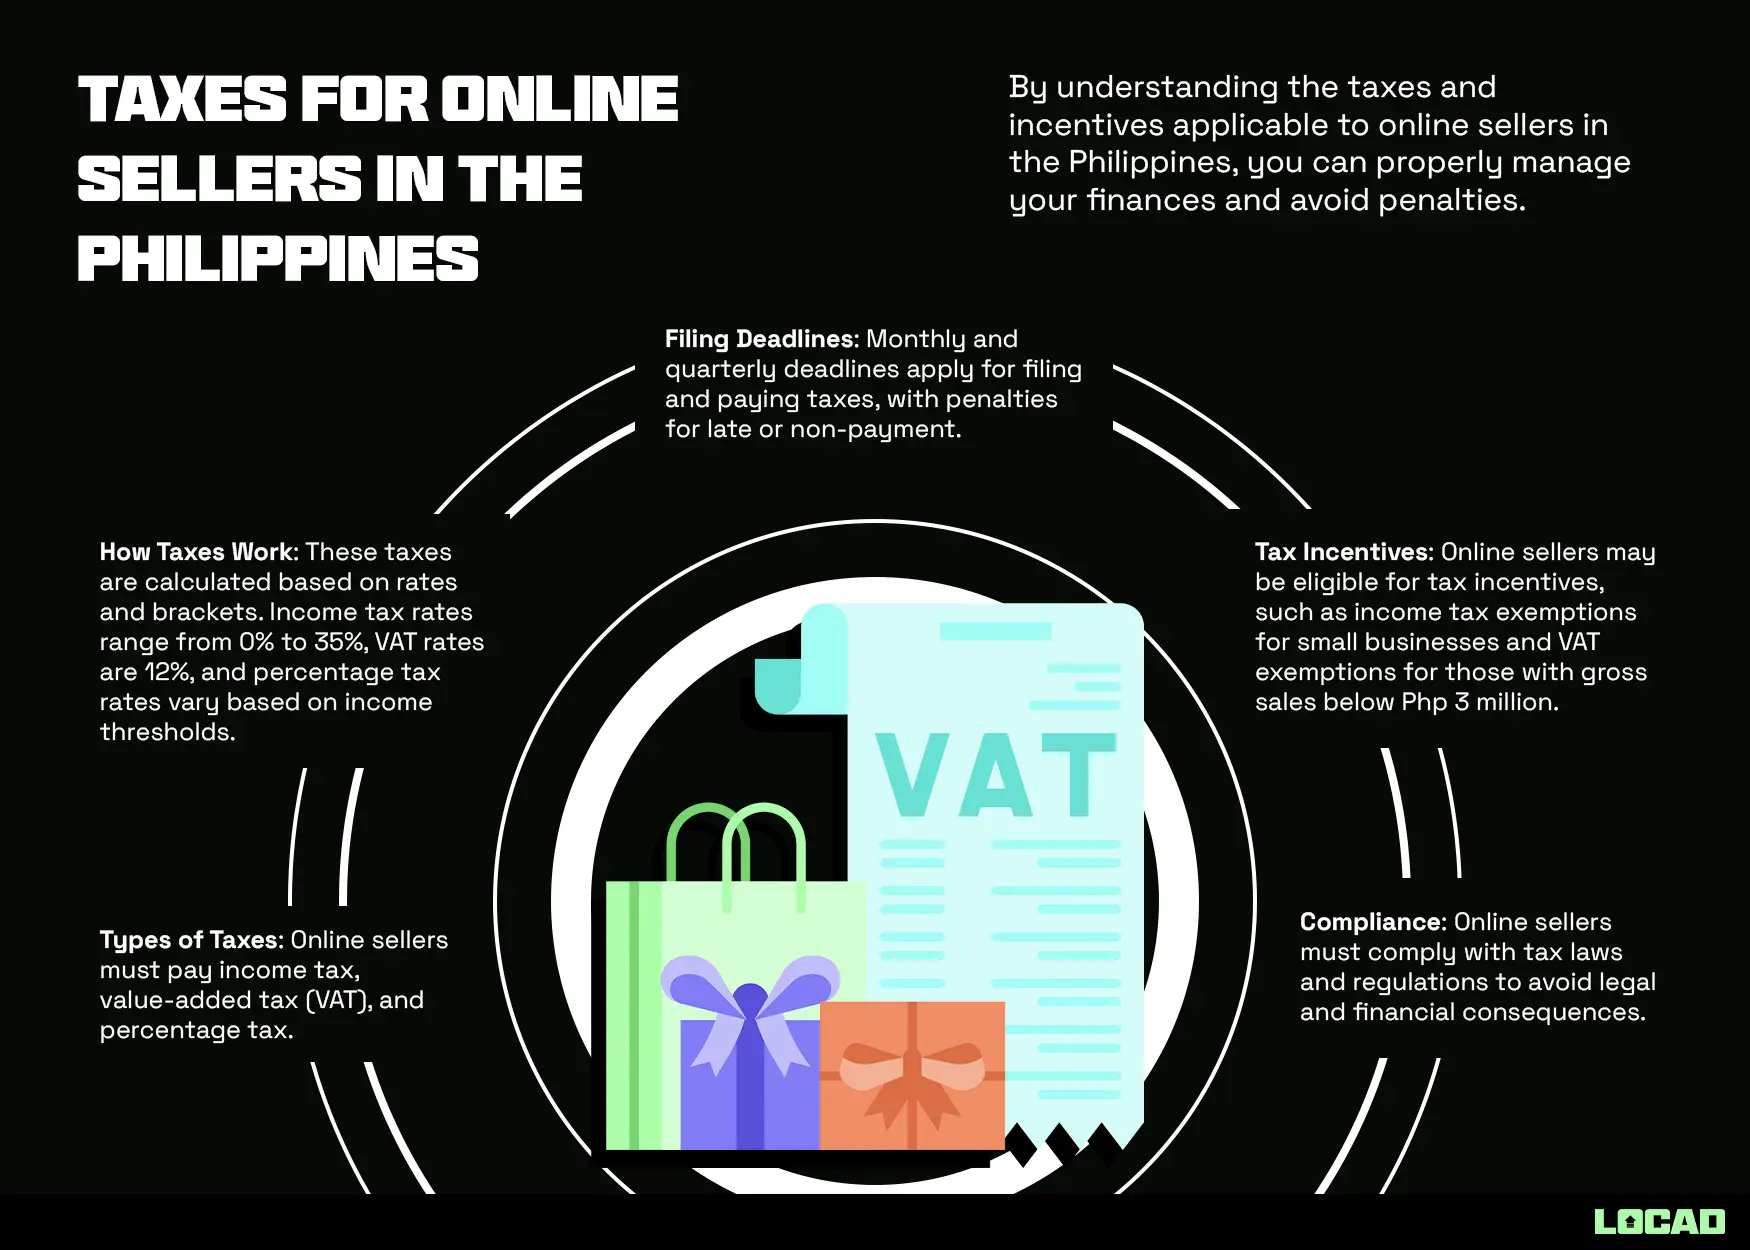 Taxes for Online Sellers in the Philippines